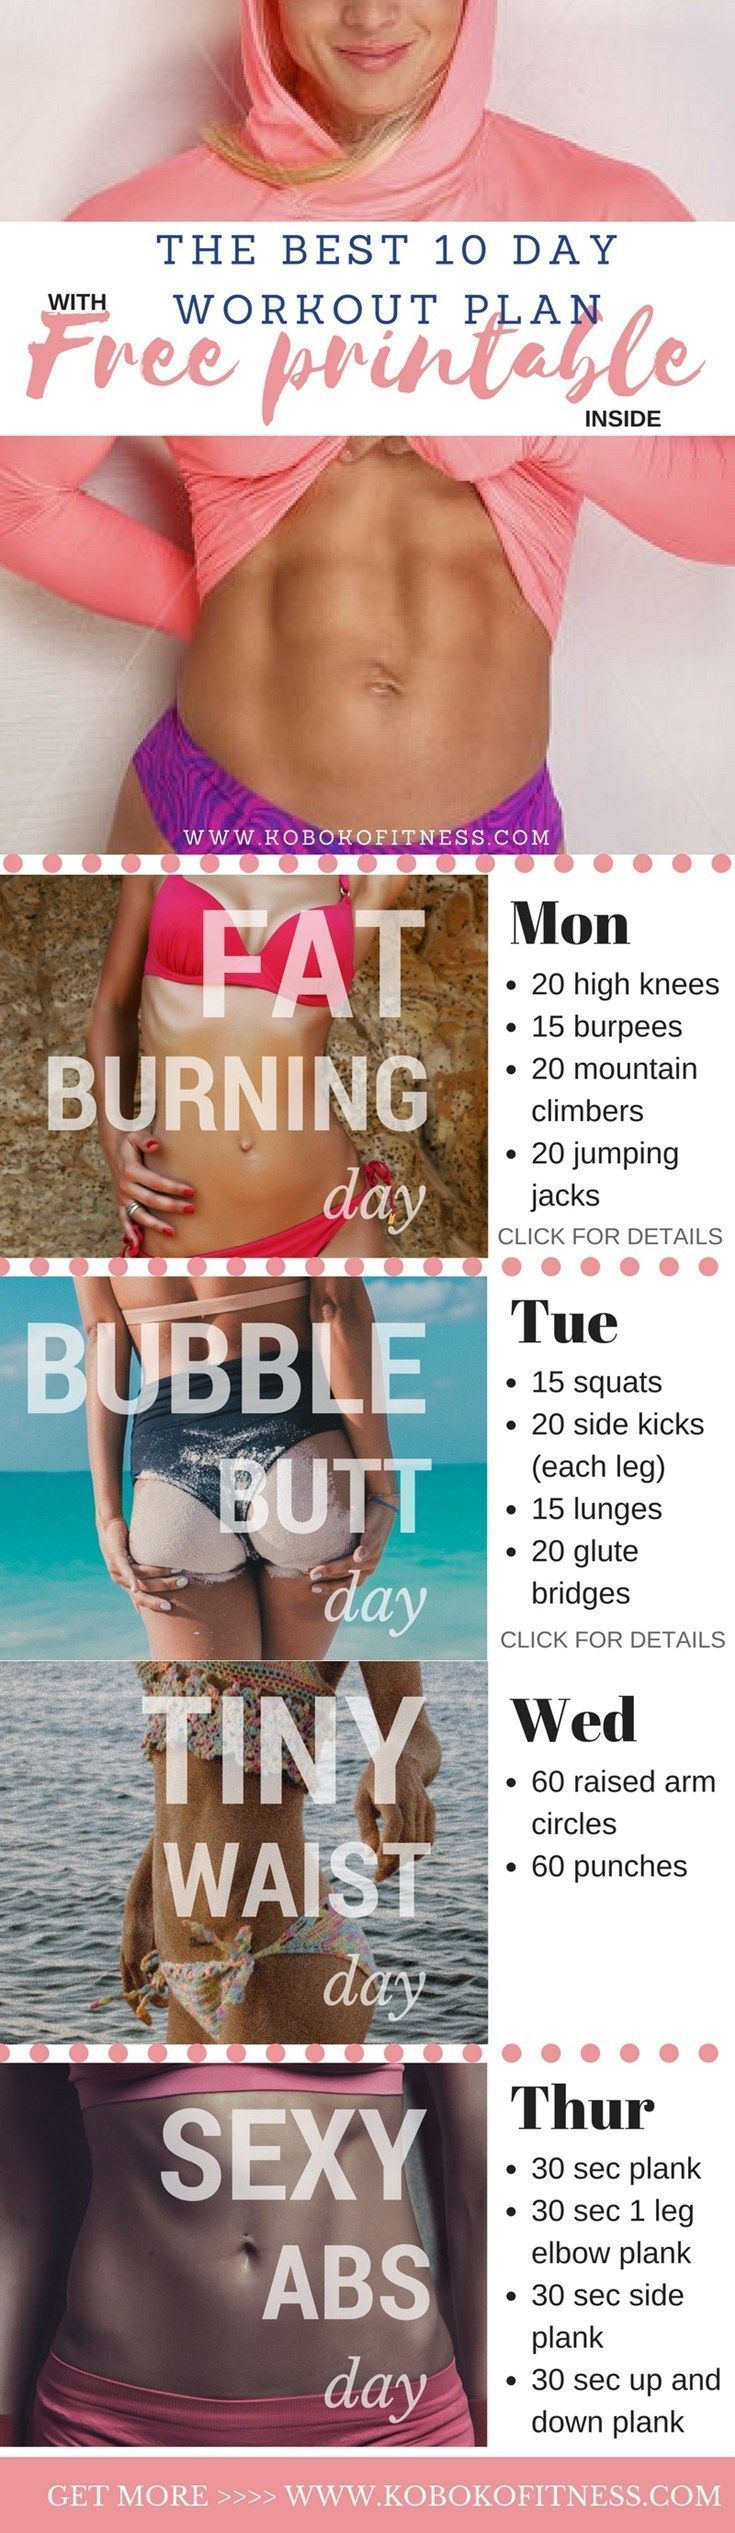 Albums - The Best 10 Day Home Workout Plan (+ Free Printable